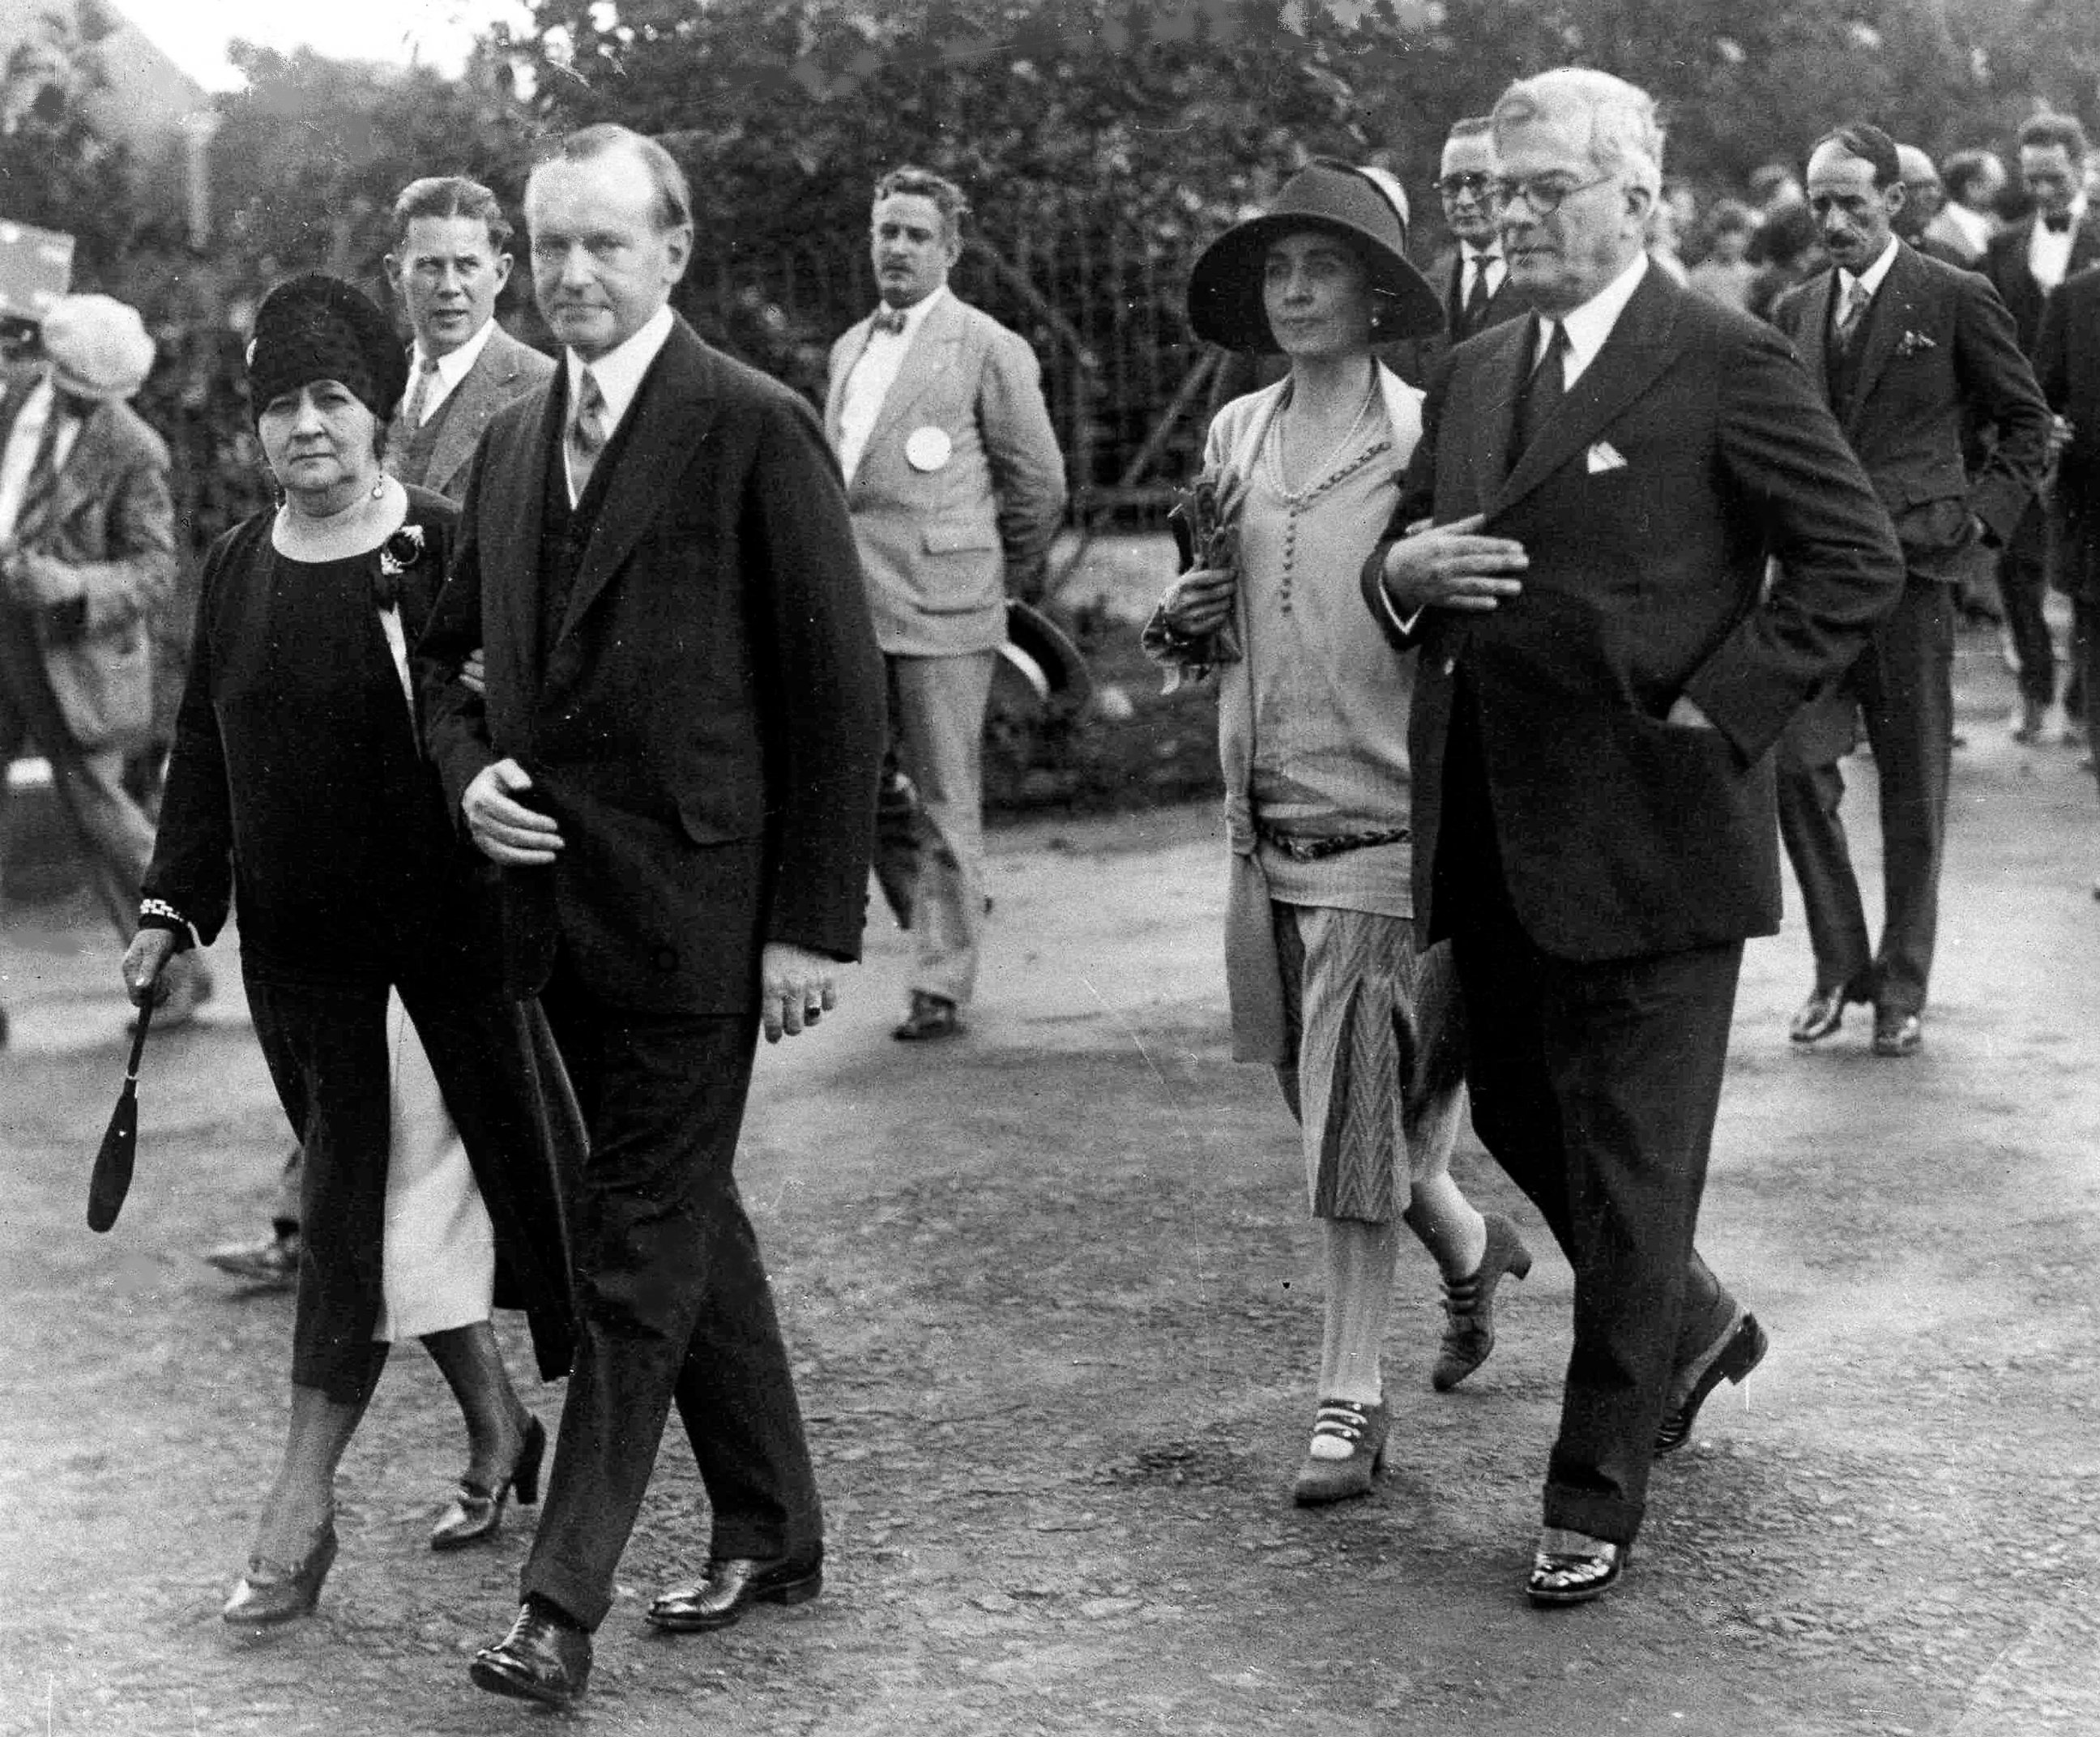 PHOTO: President Calvin Coolidge and his wife, first lady Grace Coolidge are shown with the President of Cuba General Gerardo Machado y Morales and his wife, Elvira Machado, walk on the estate of President Machado in Havana, Cuba, Jan. 19, 1928. 